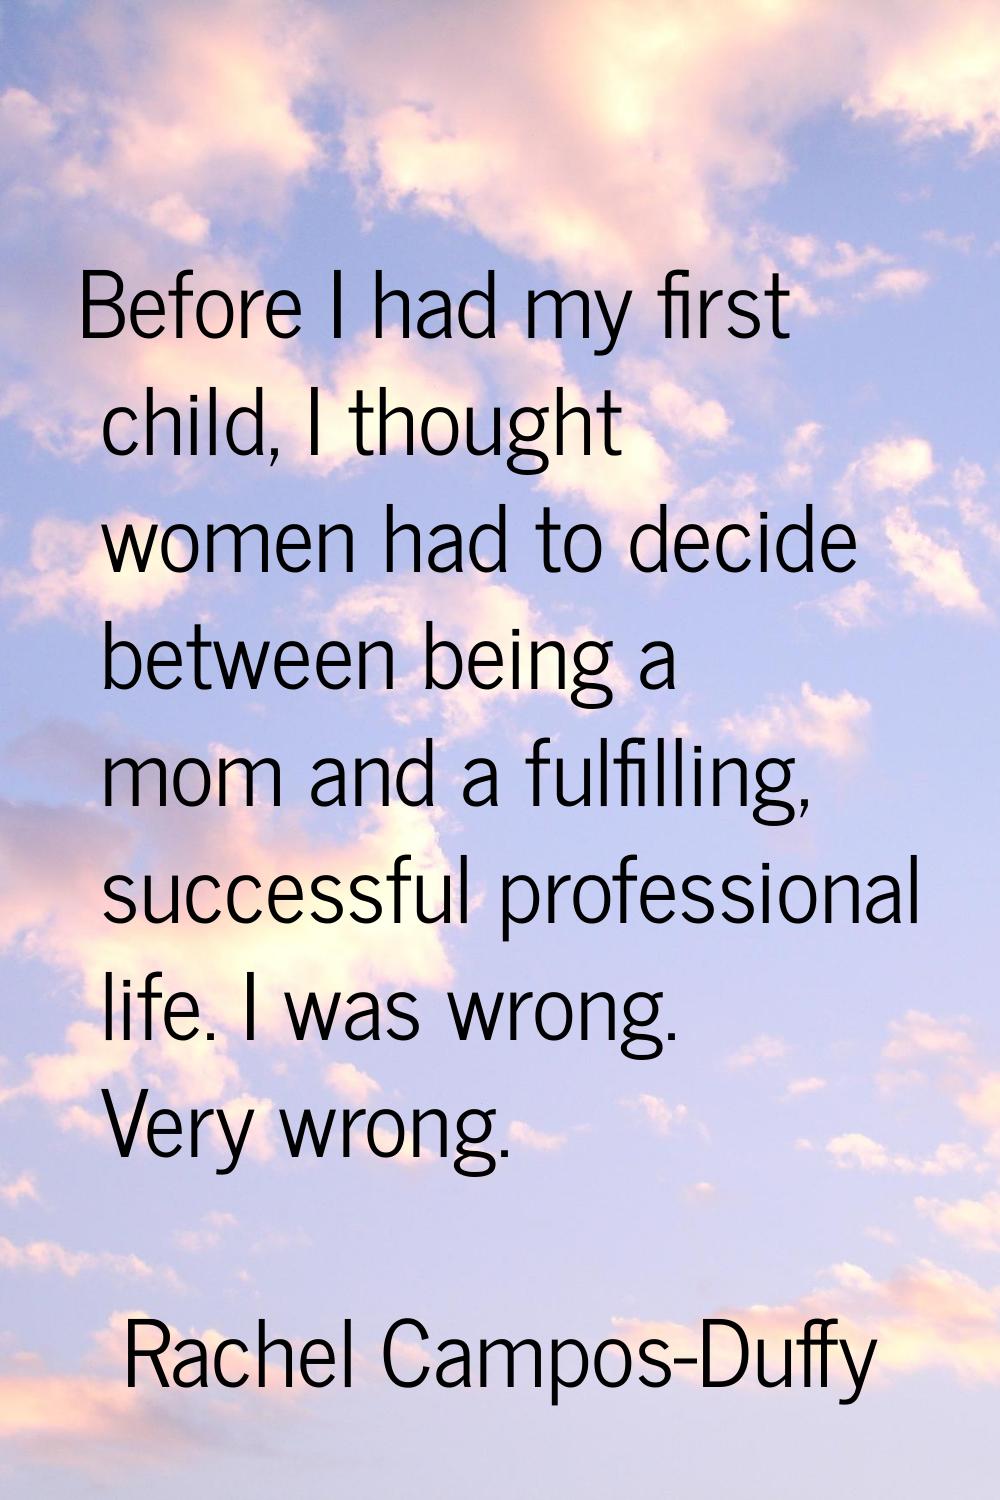 Before I had my first child, I thought women had to decide between being a mom and a fulfilling, su